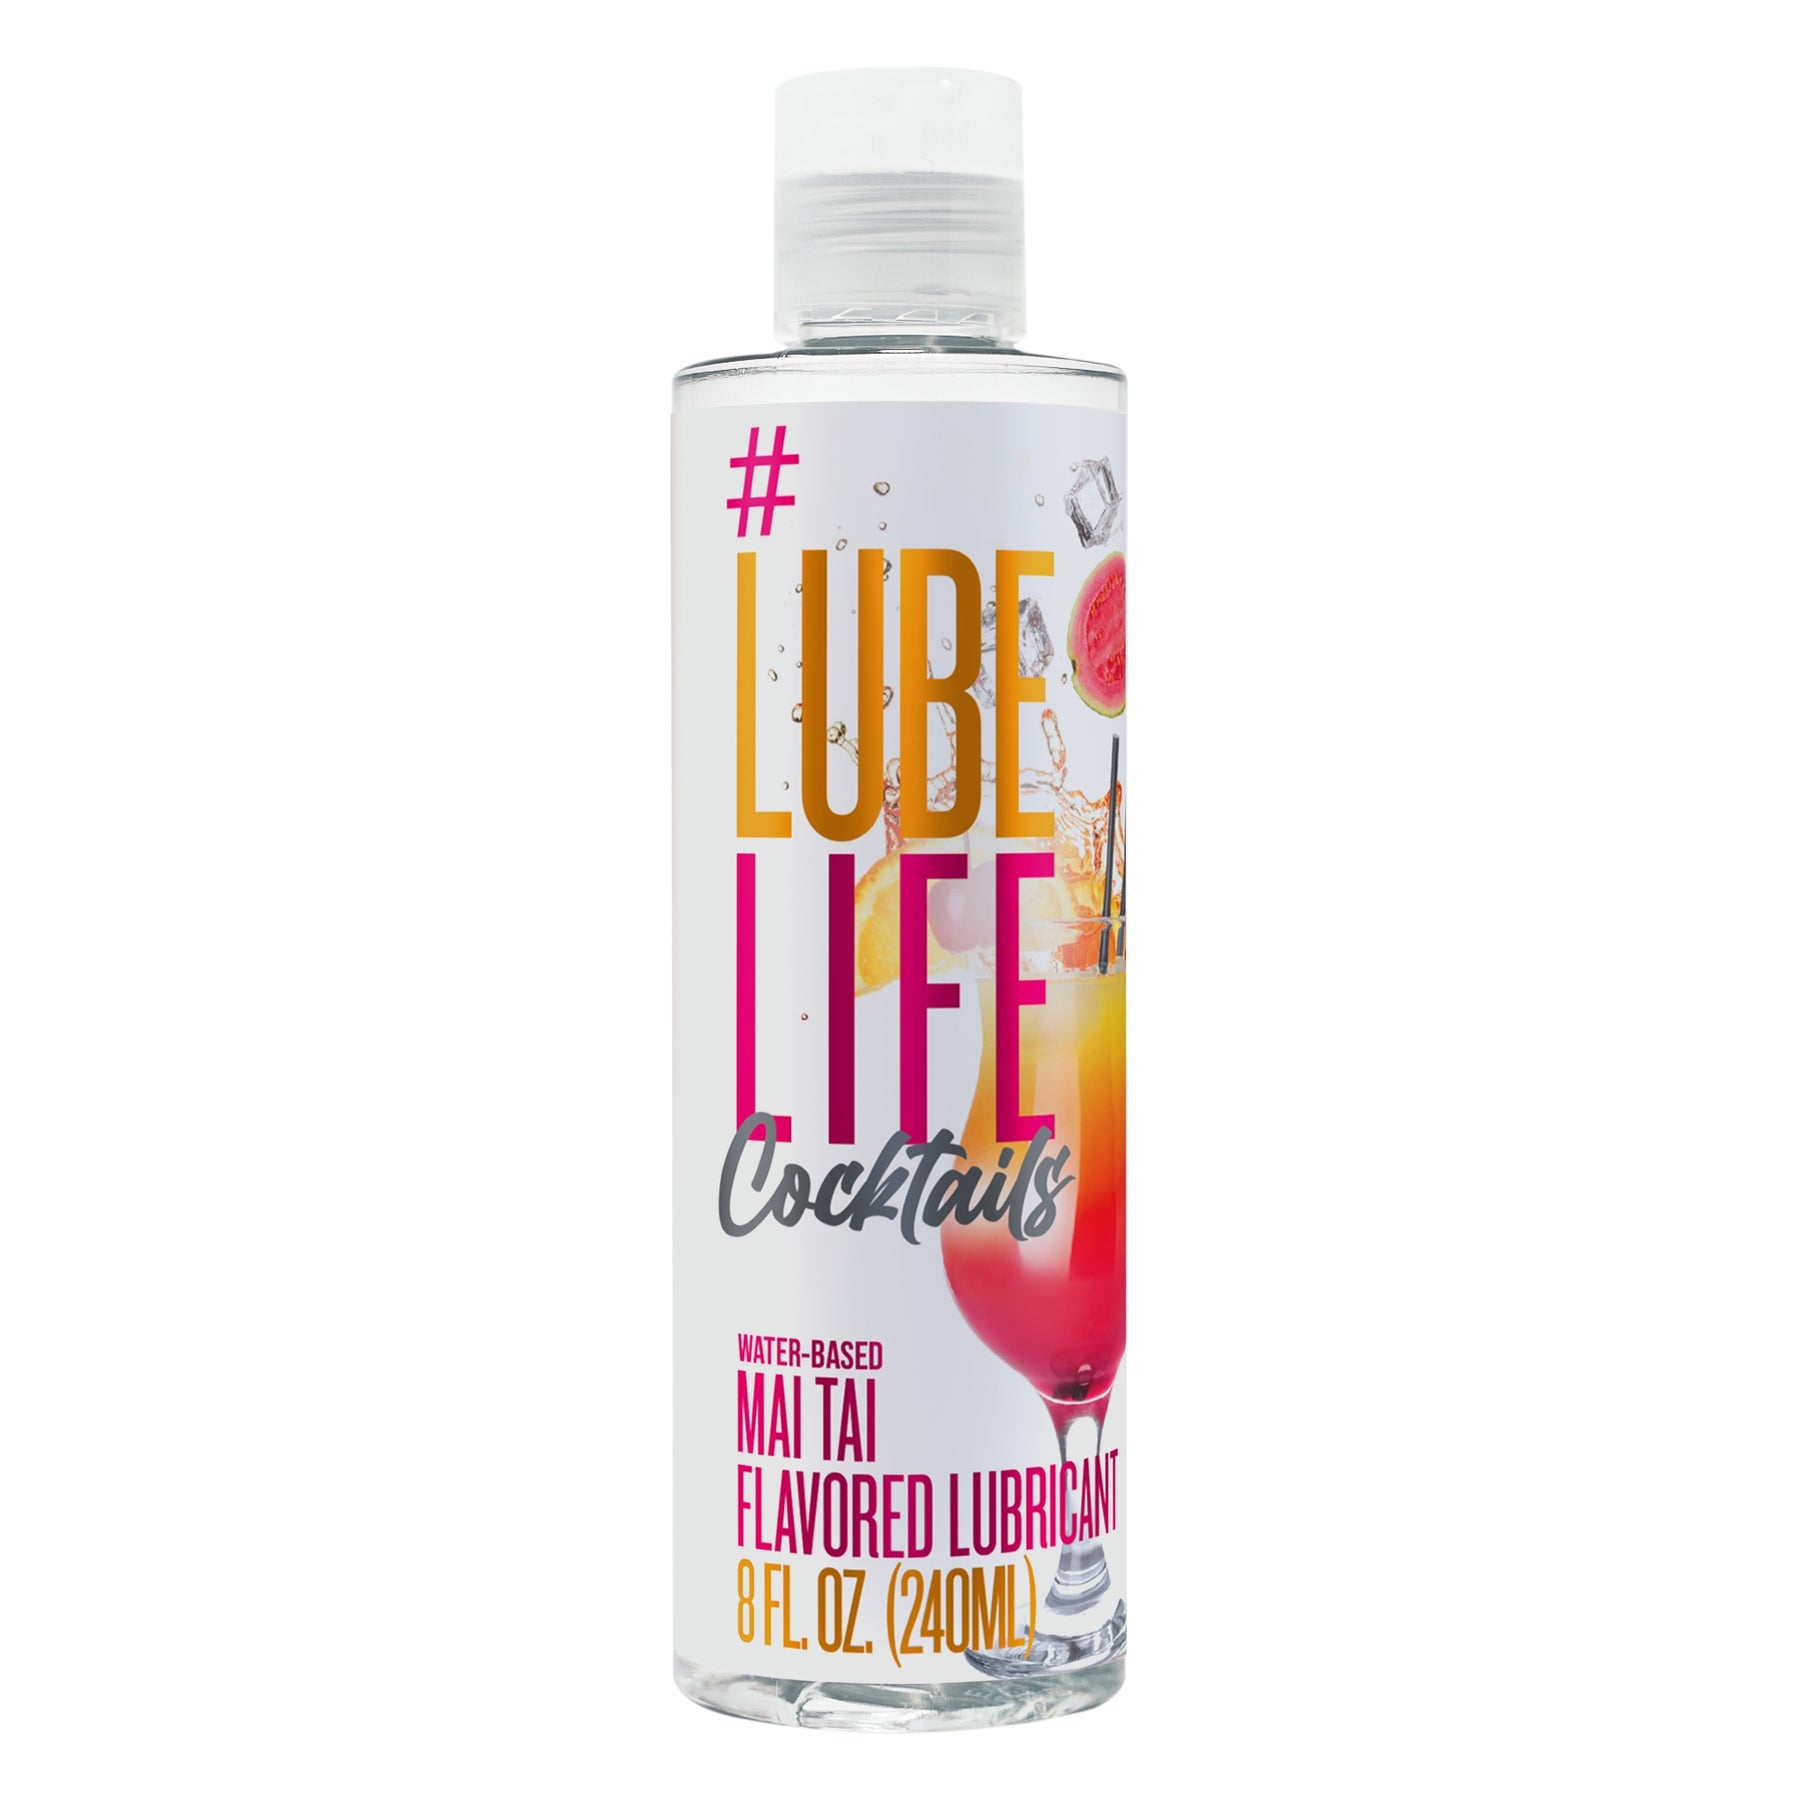 Water-Based Mai Tai Flavored Lubricant – #Lubelife